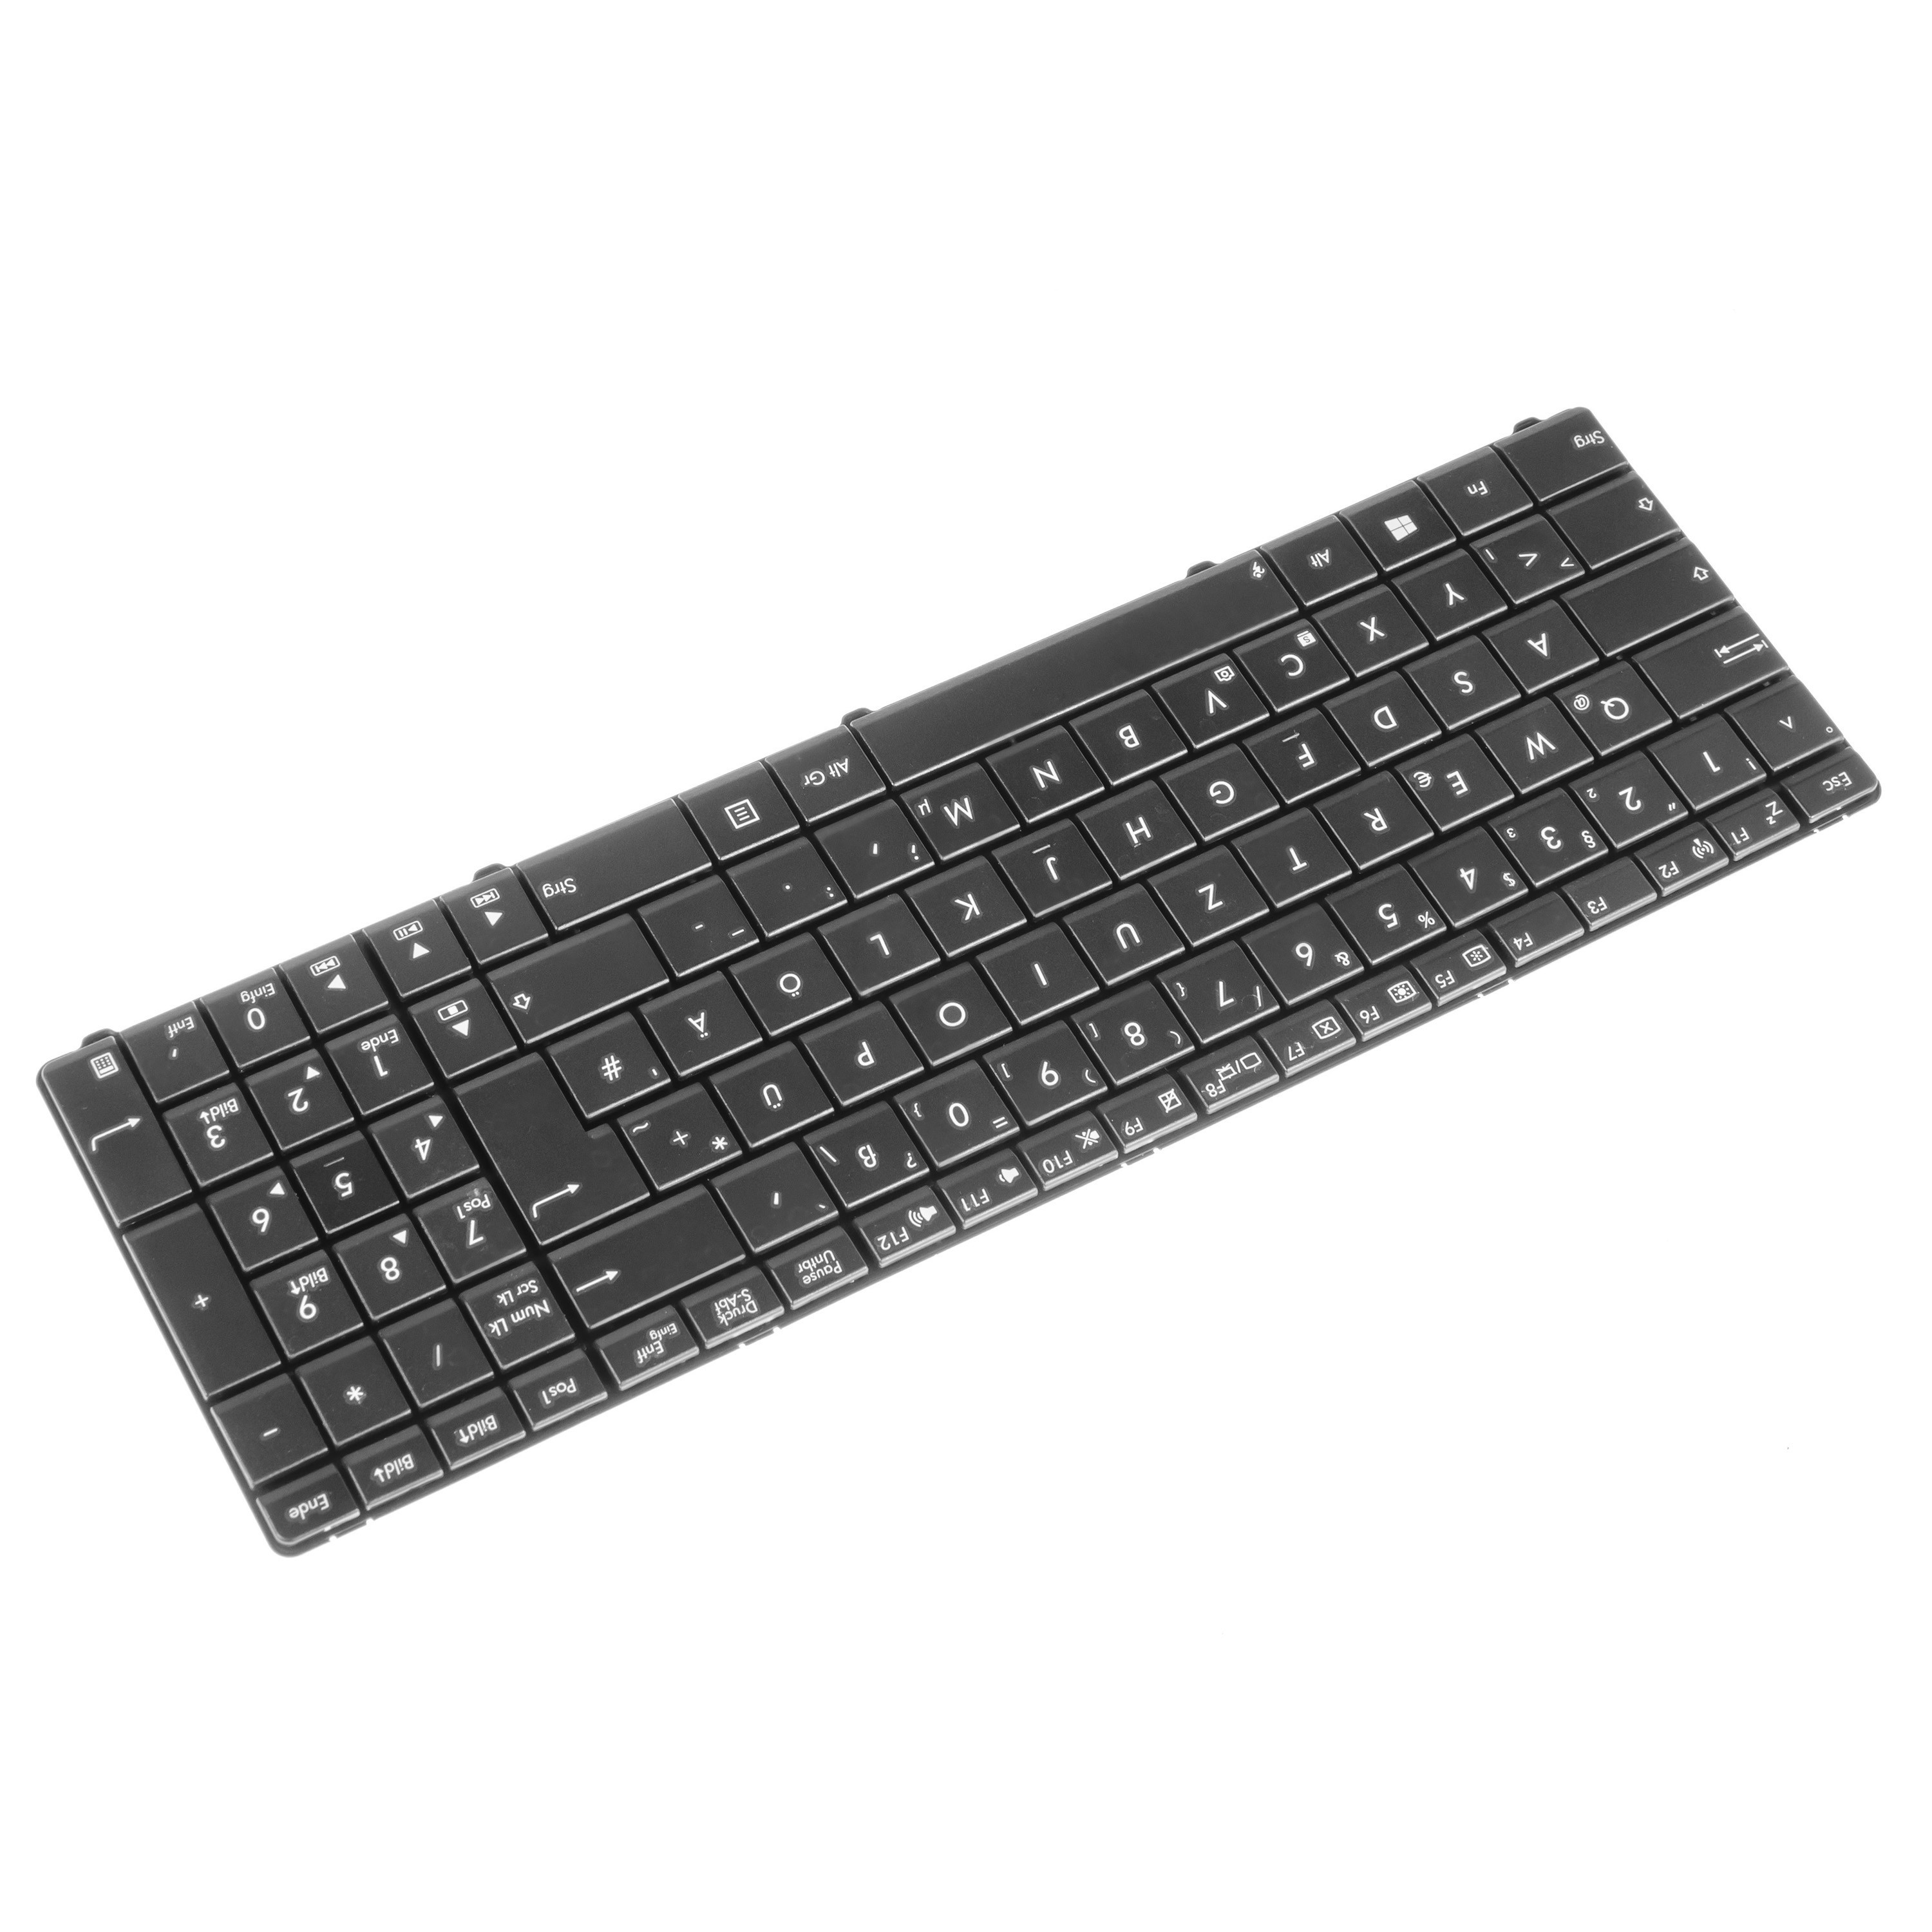 Green Cell German Keyboard for  Laptop Asus A52, F50, F55, F70, F75, X54C, X54H